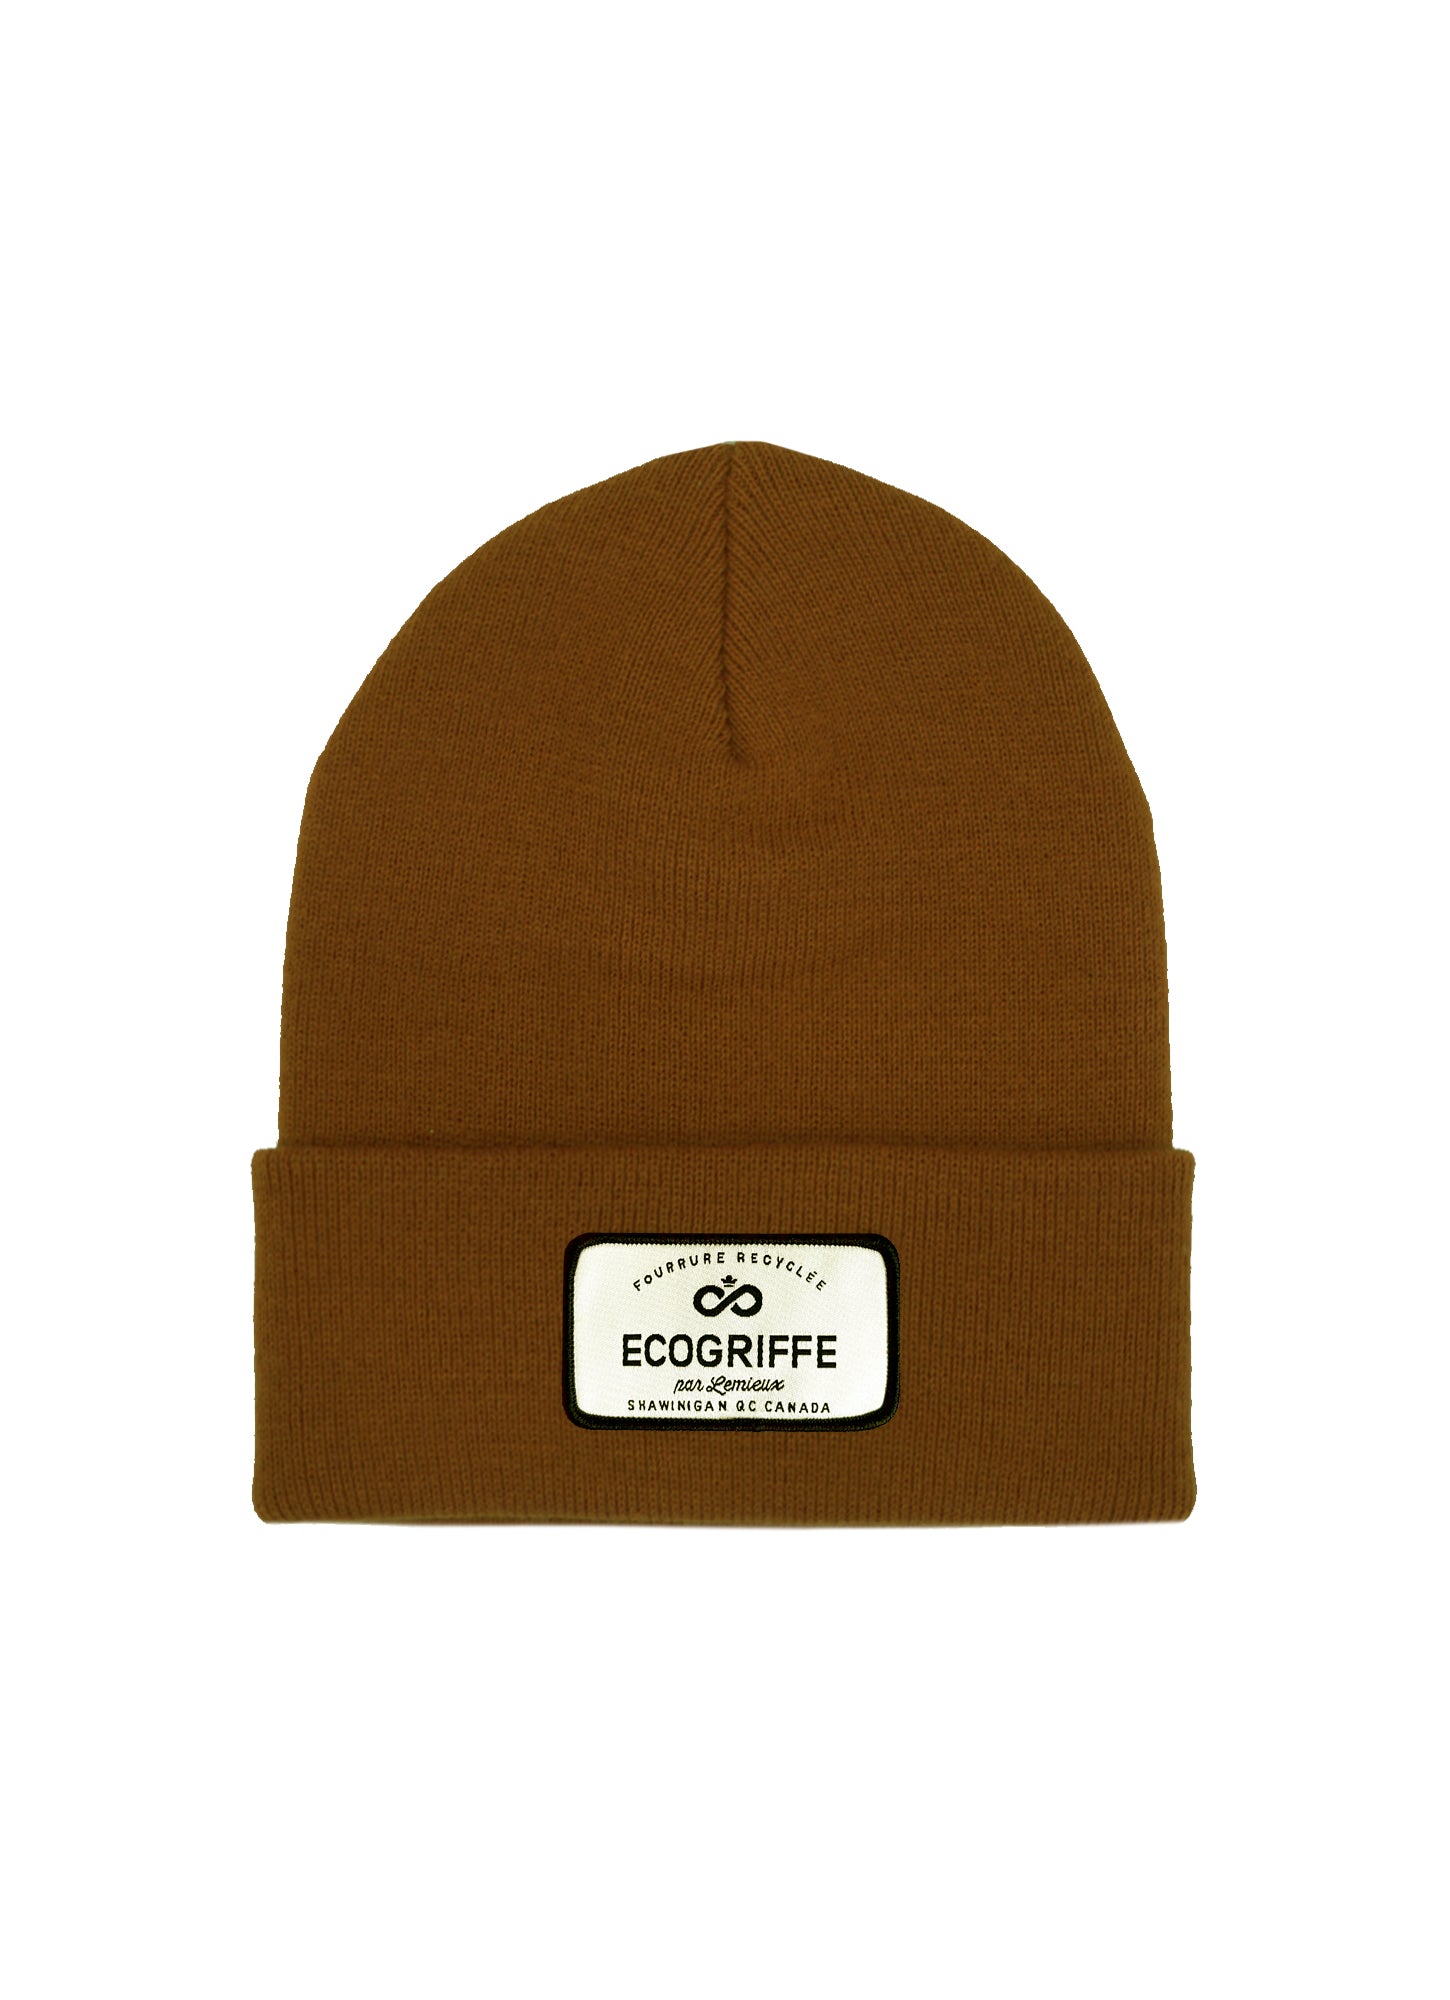 Tuque marron Tradition - taille adulte